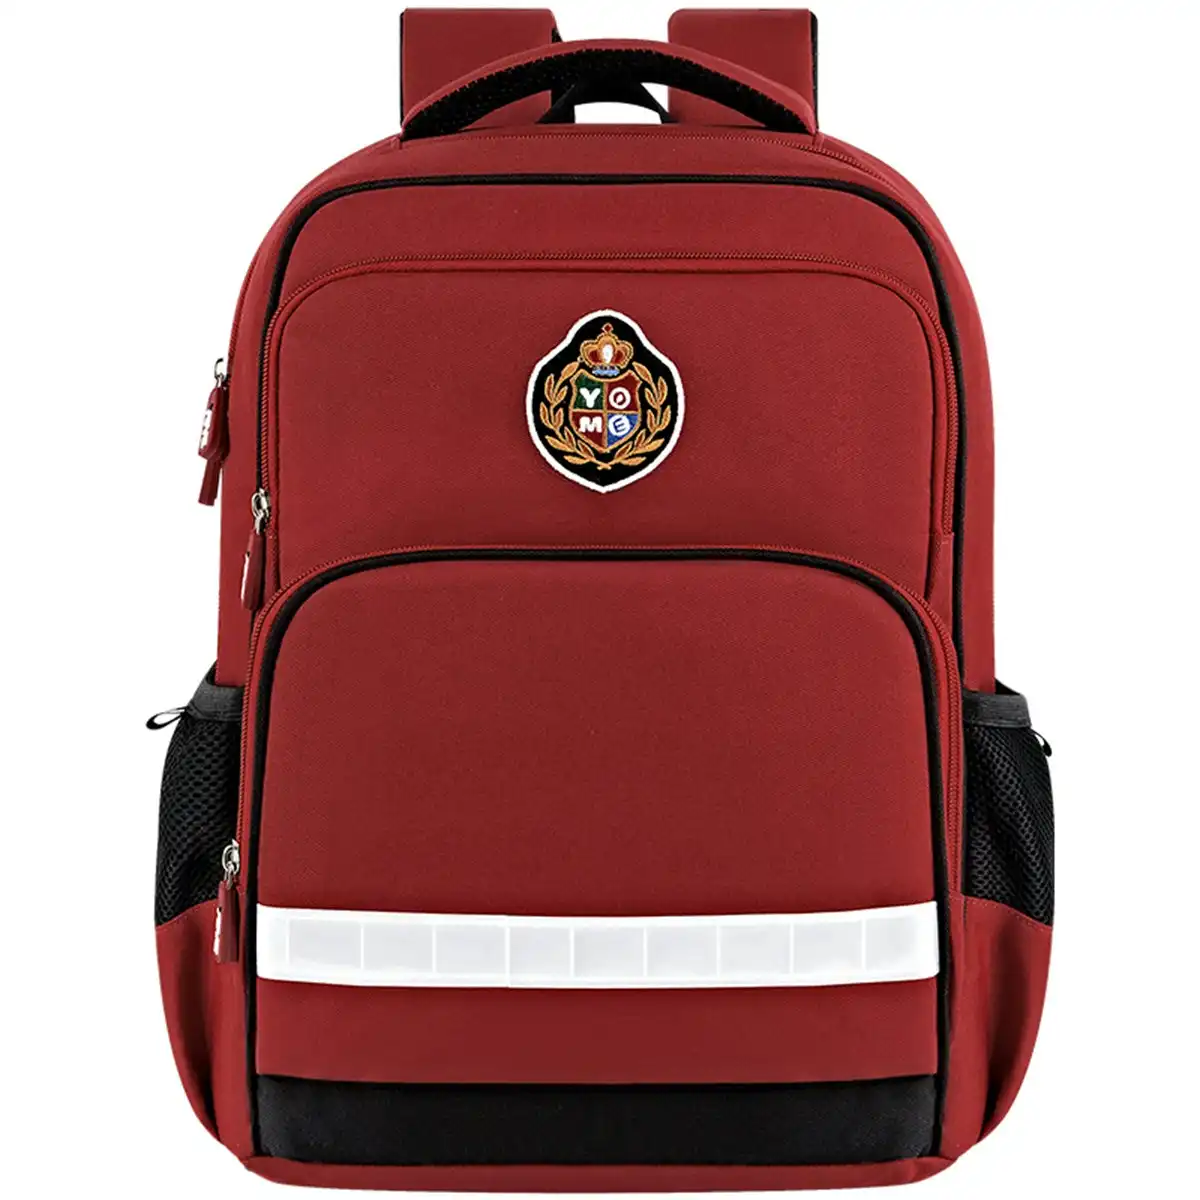 Yome Kids School Backpack With Back Support and Airflow Systerm For Year 3-6 Students T202 Red